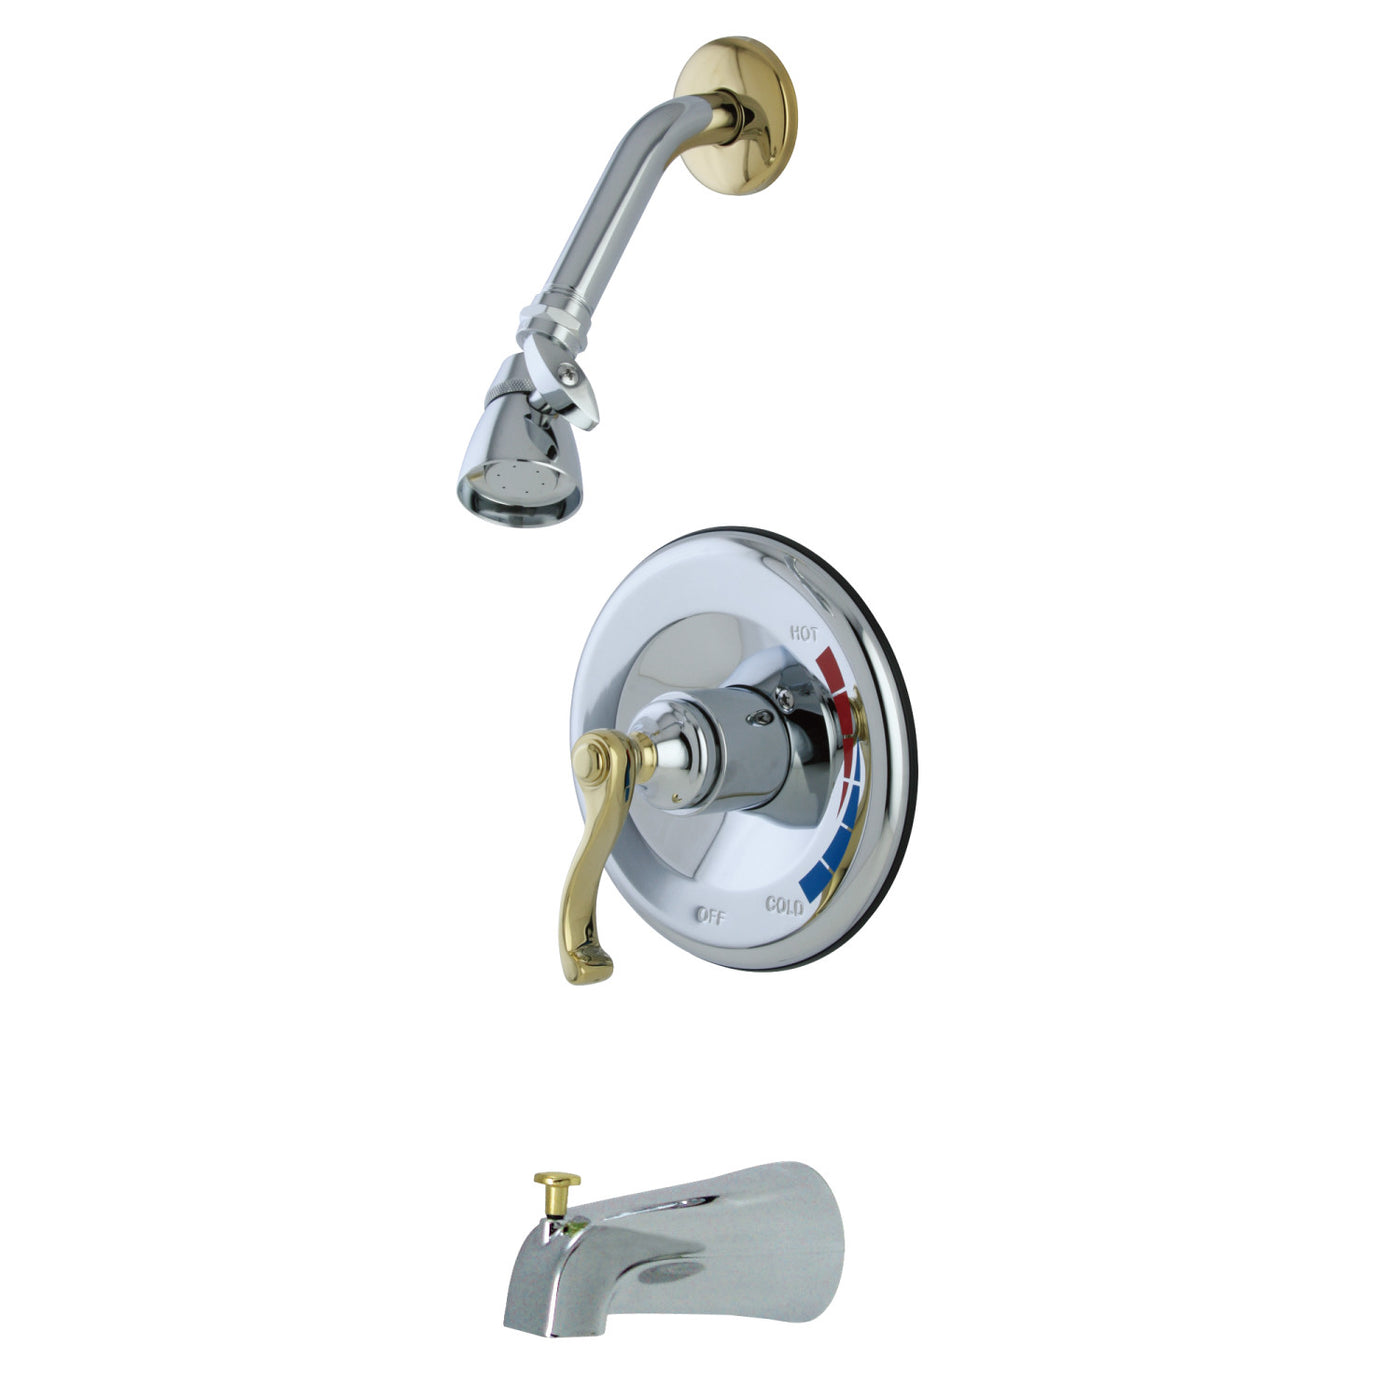 Elements of Design EB8634FL Tub and Shower Faucet, Polished Chrome/Polished Brass